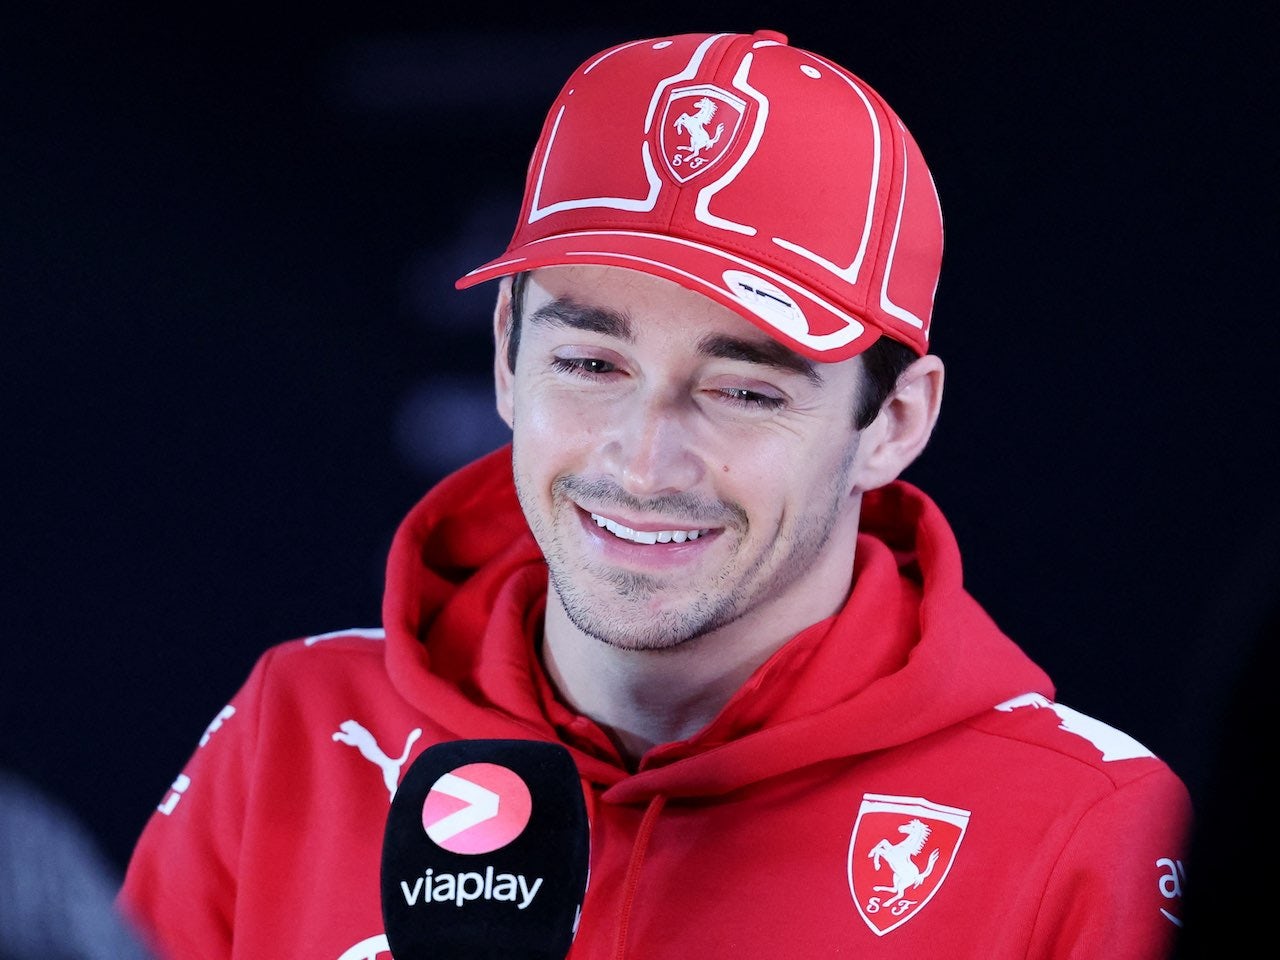 F1 insiders predict trouble ahead for Leclerc